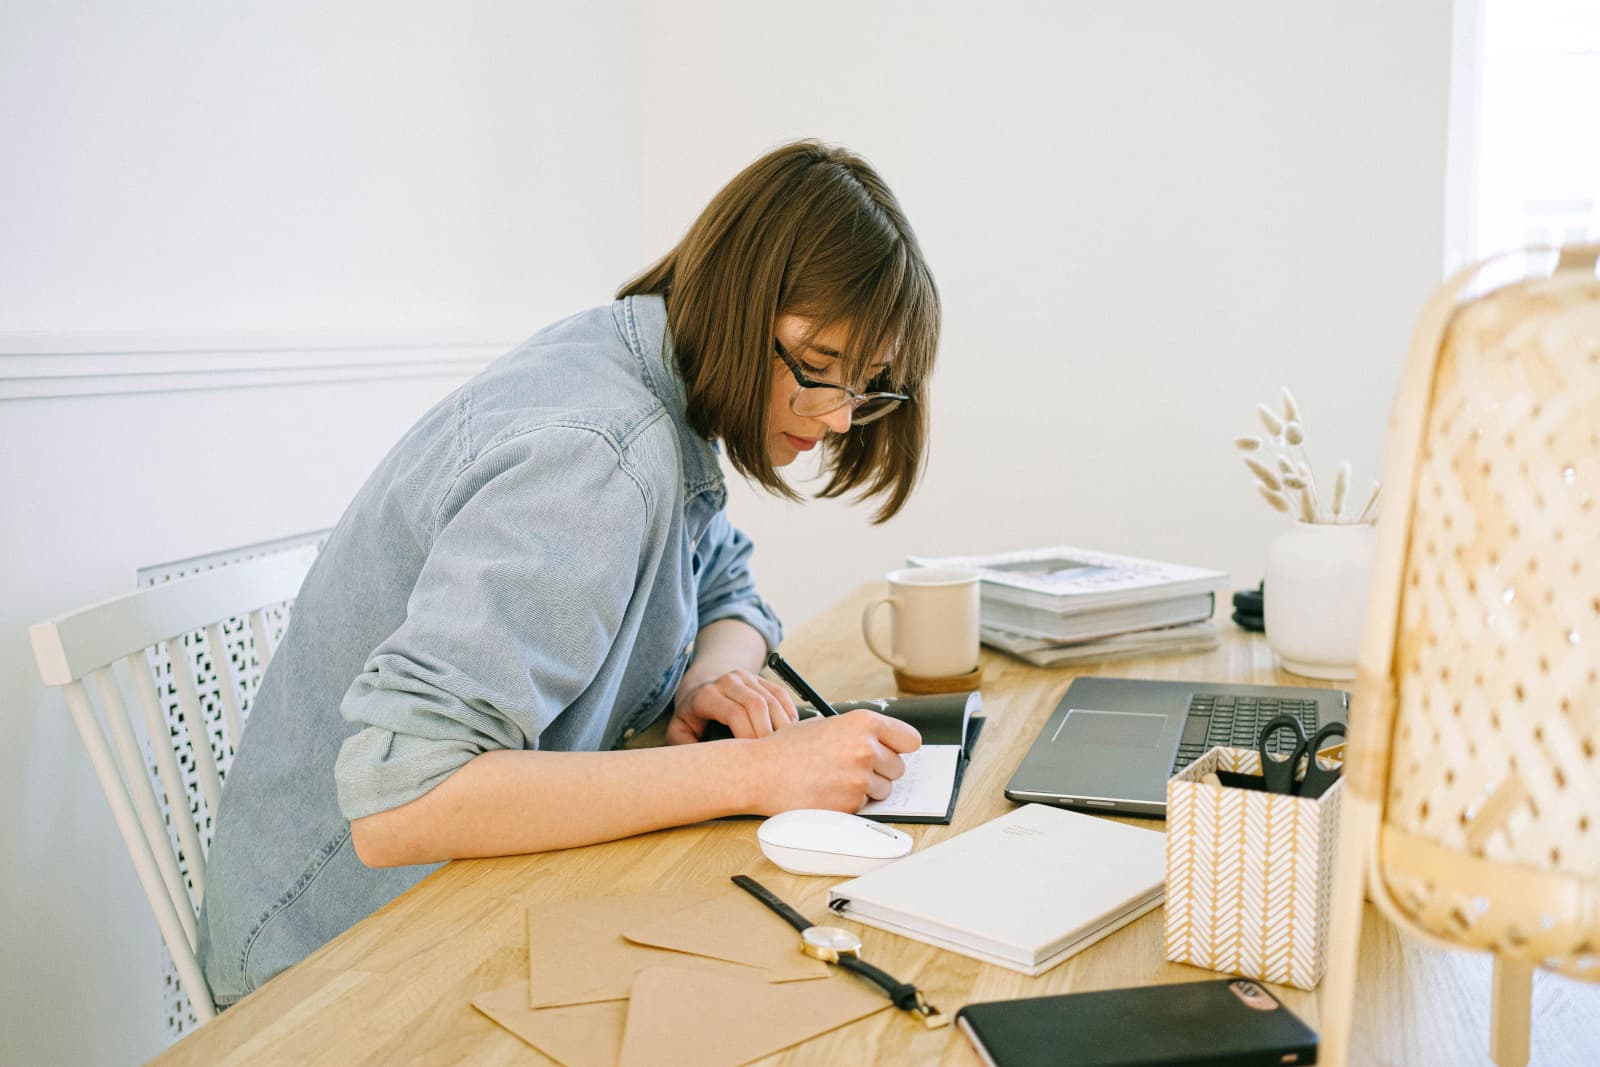 Woman working at a desk in what appears to be a home